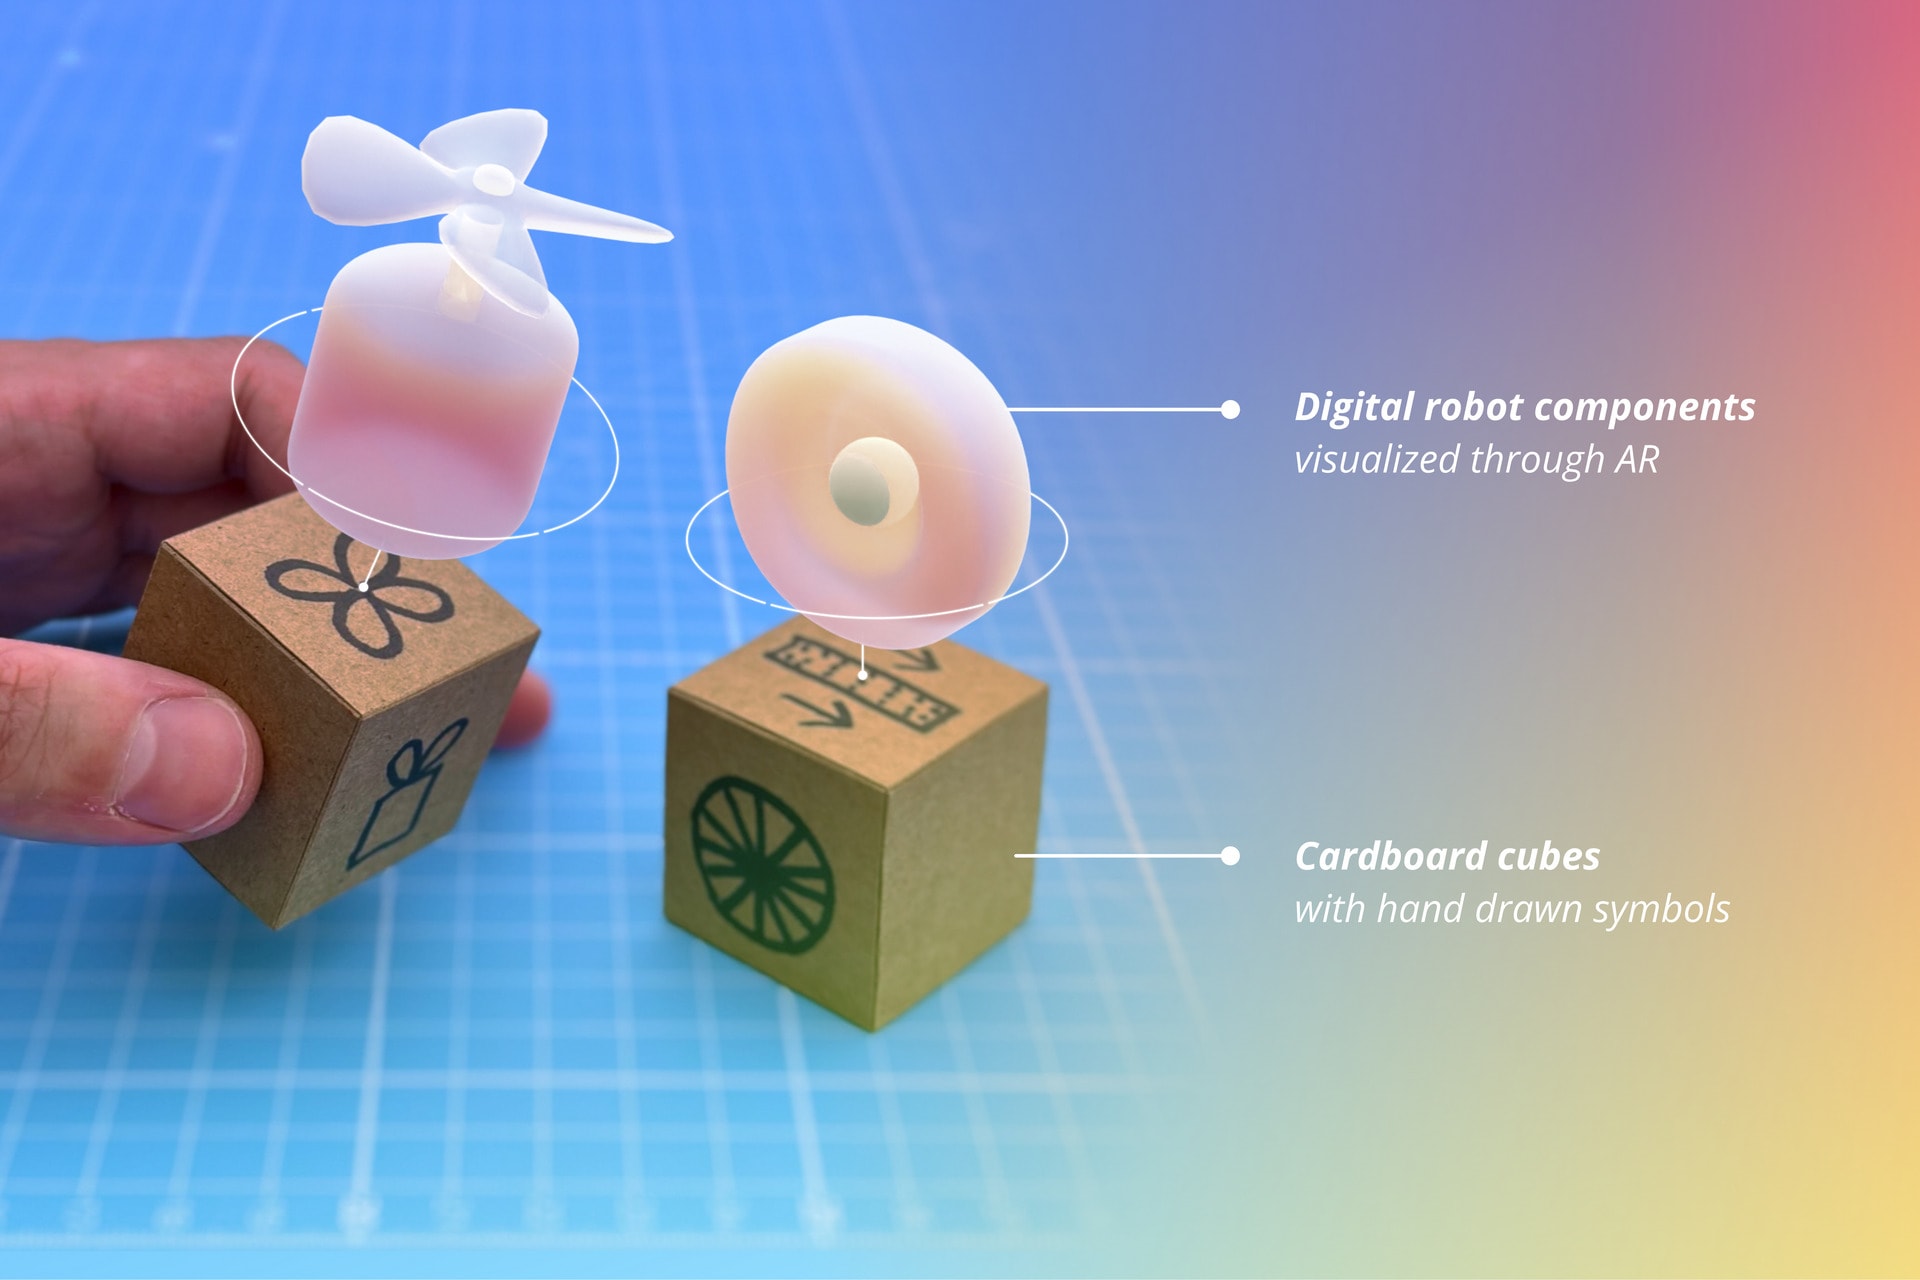 Digital robot components visualized through AR on top of cardboard cubes